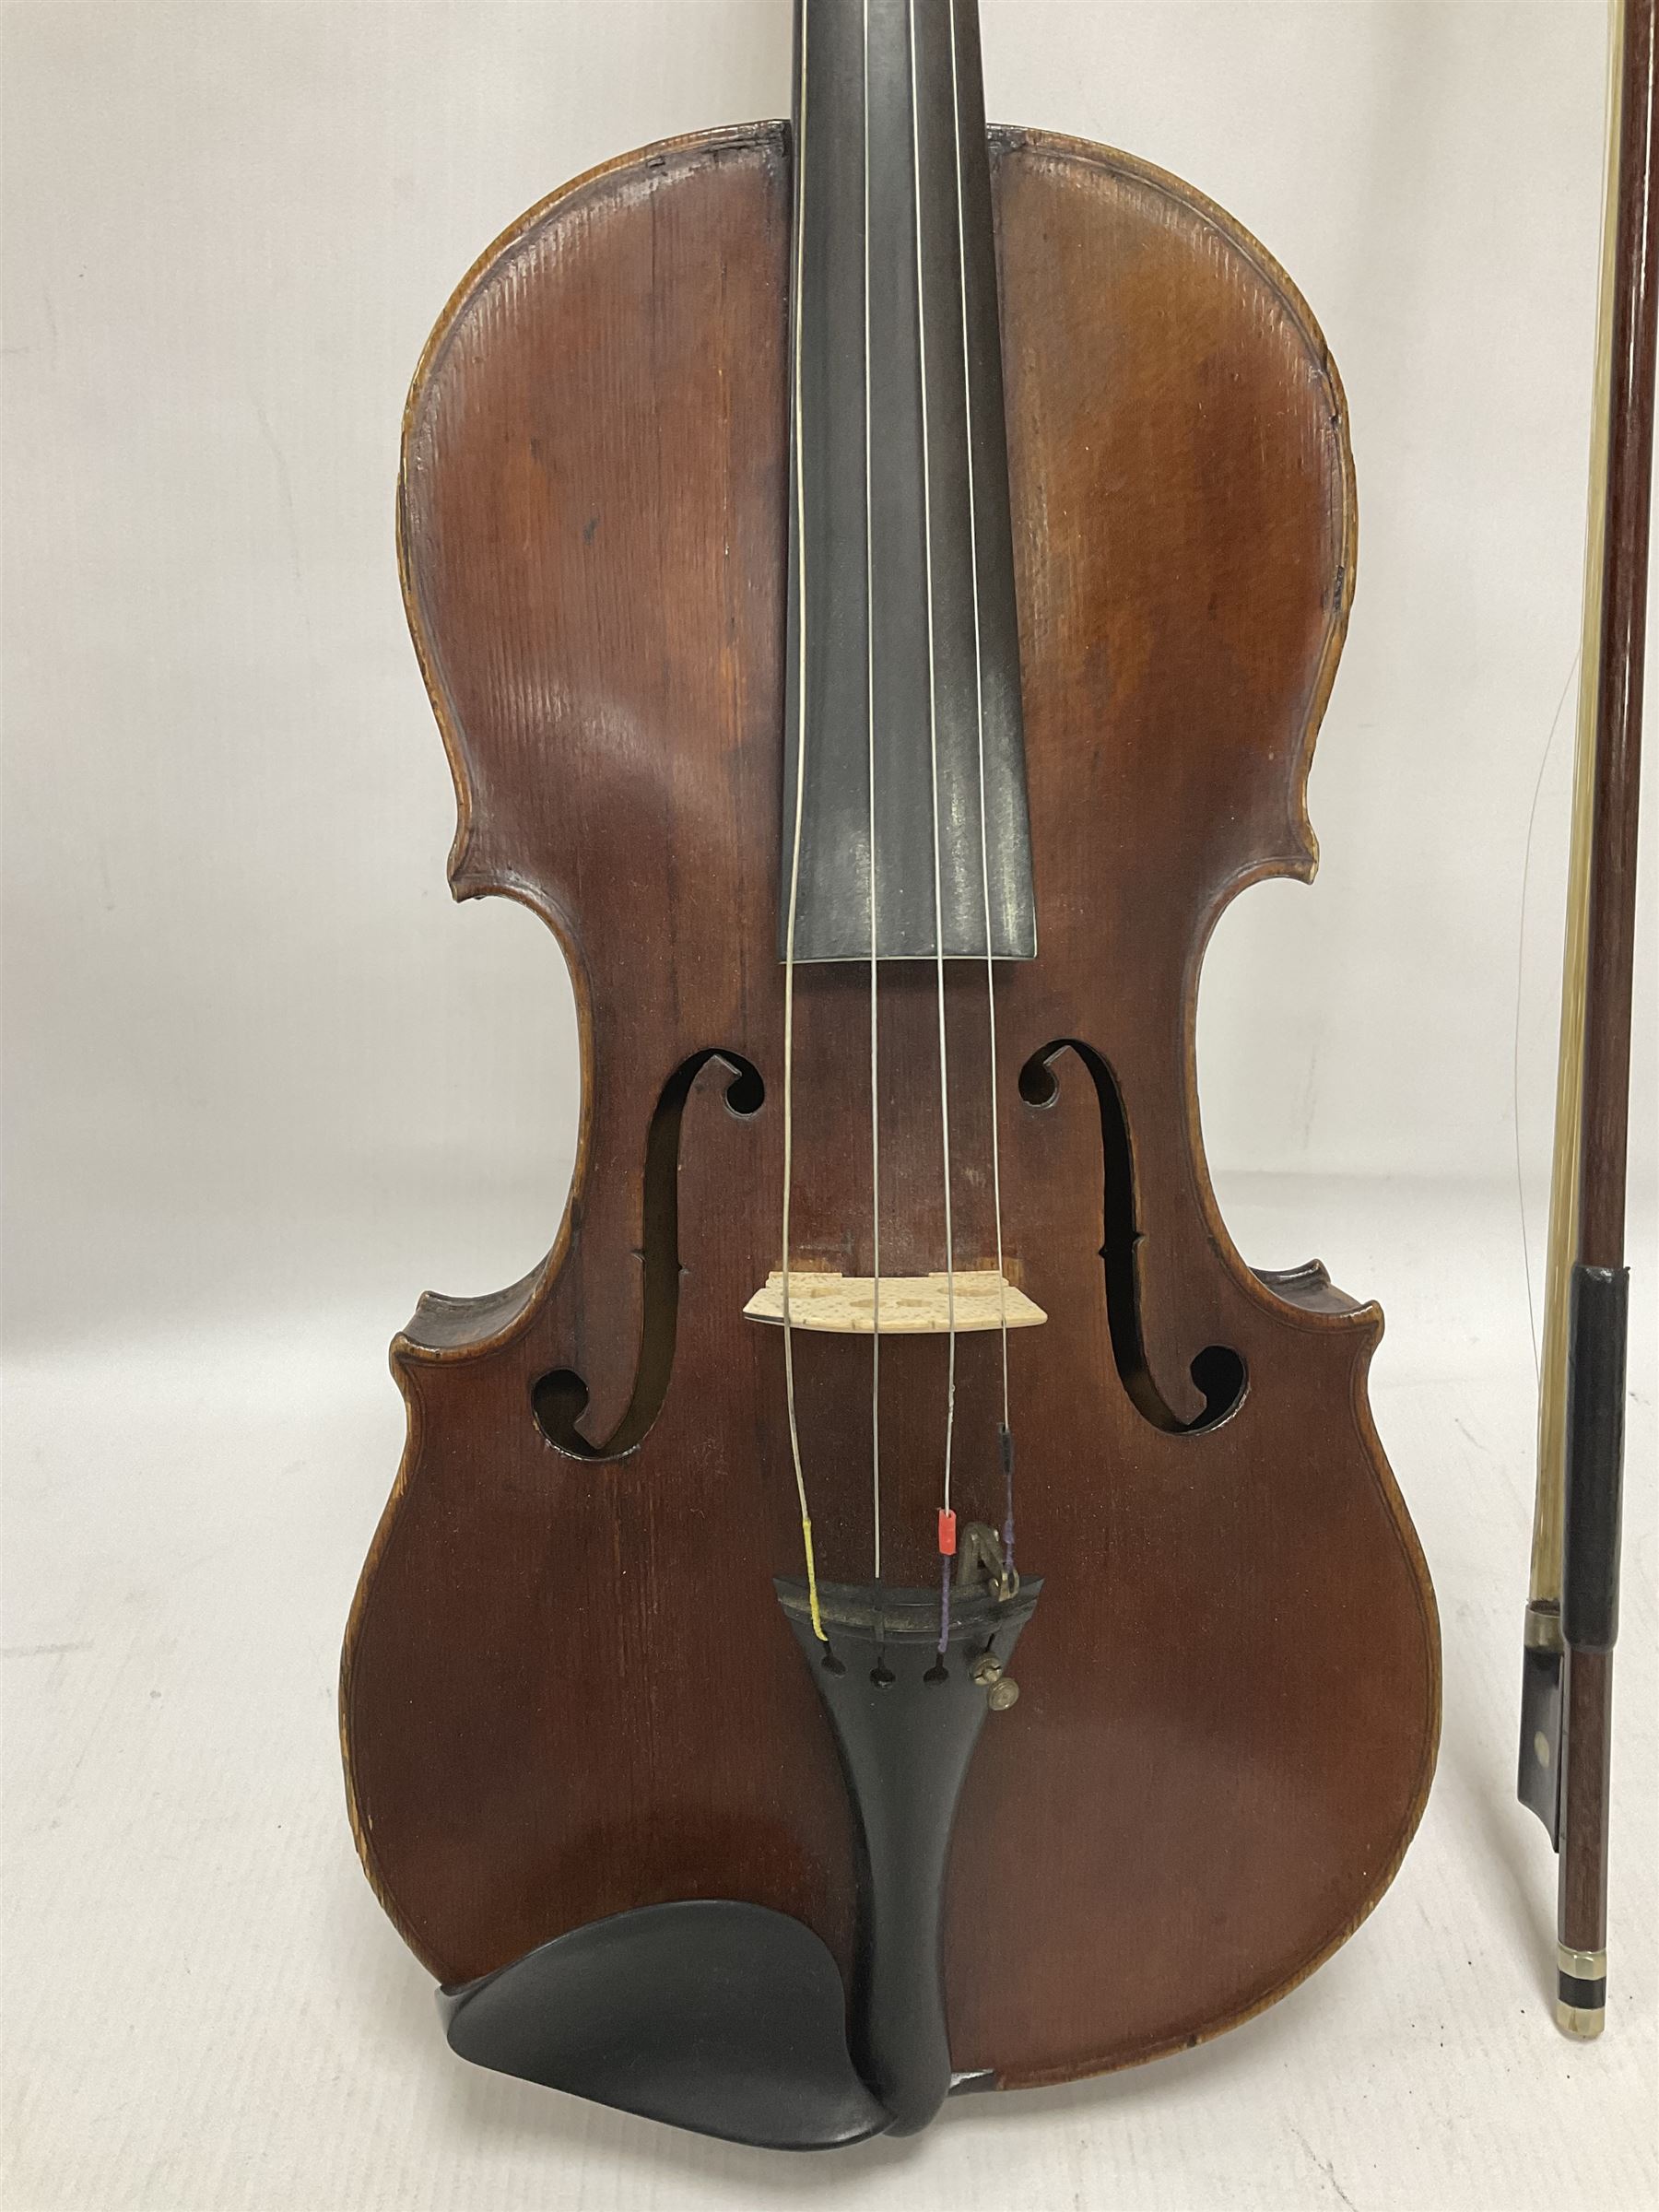 Full size violin and bow in a wooden constructed fitted case - Image 6 of 23